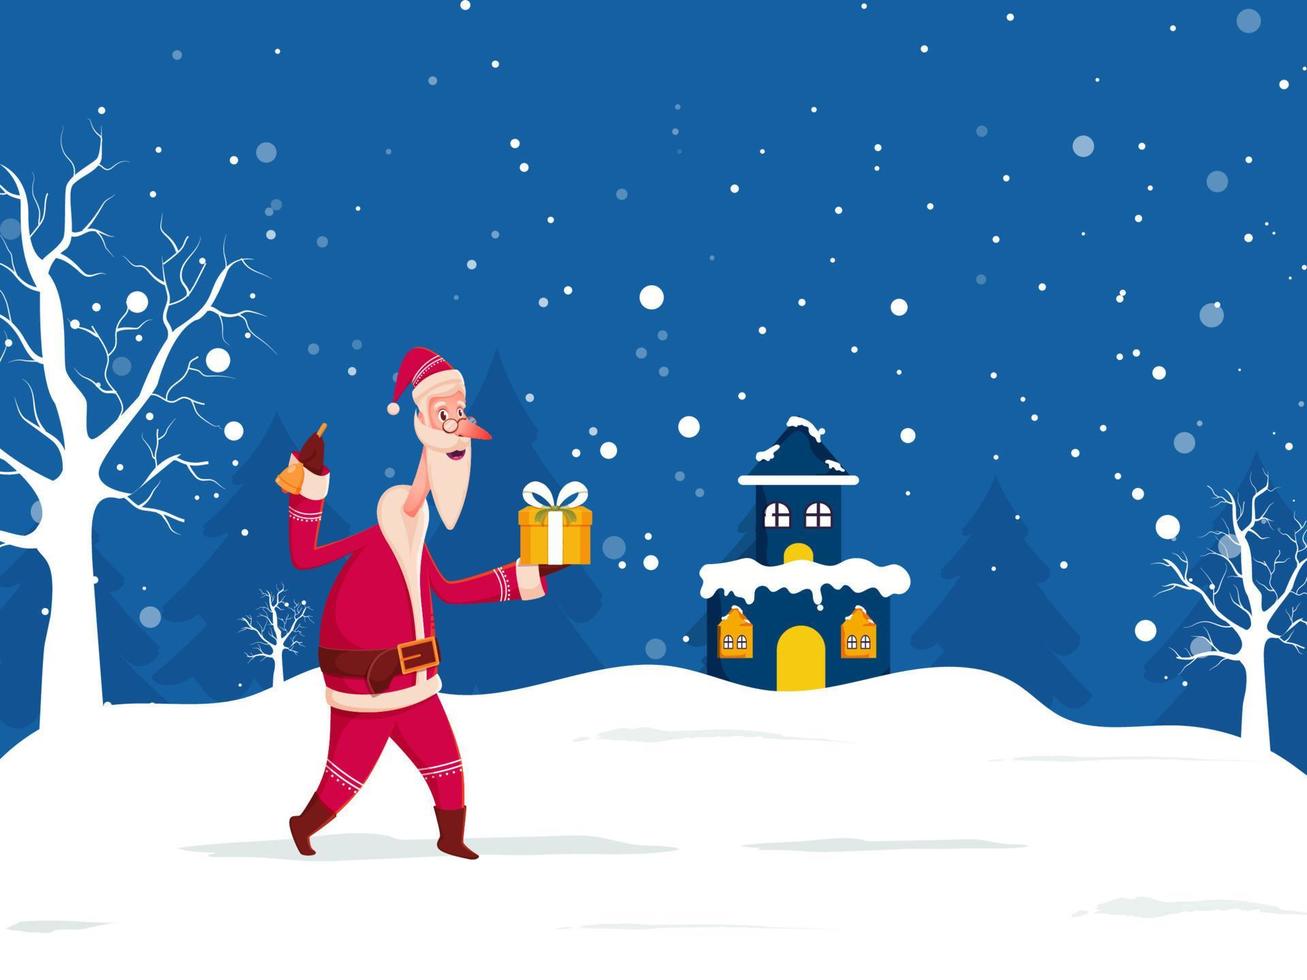 Cheerful Santa Claus Holding a Gift Box with Bell, Bare Trees and House Illustration on Snow Falling Blue and White Background. vector